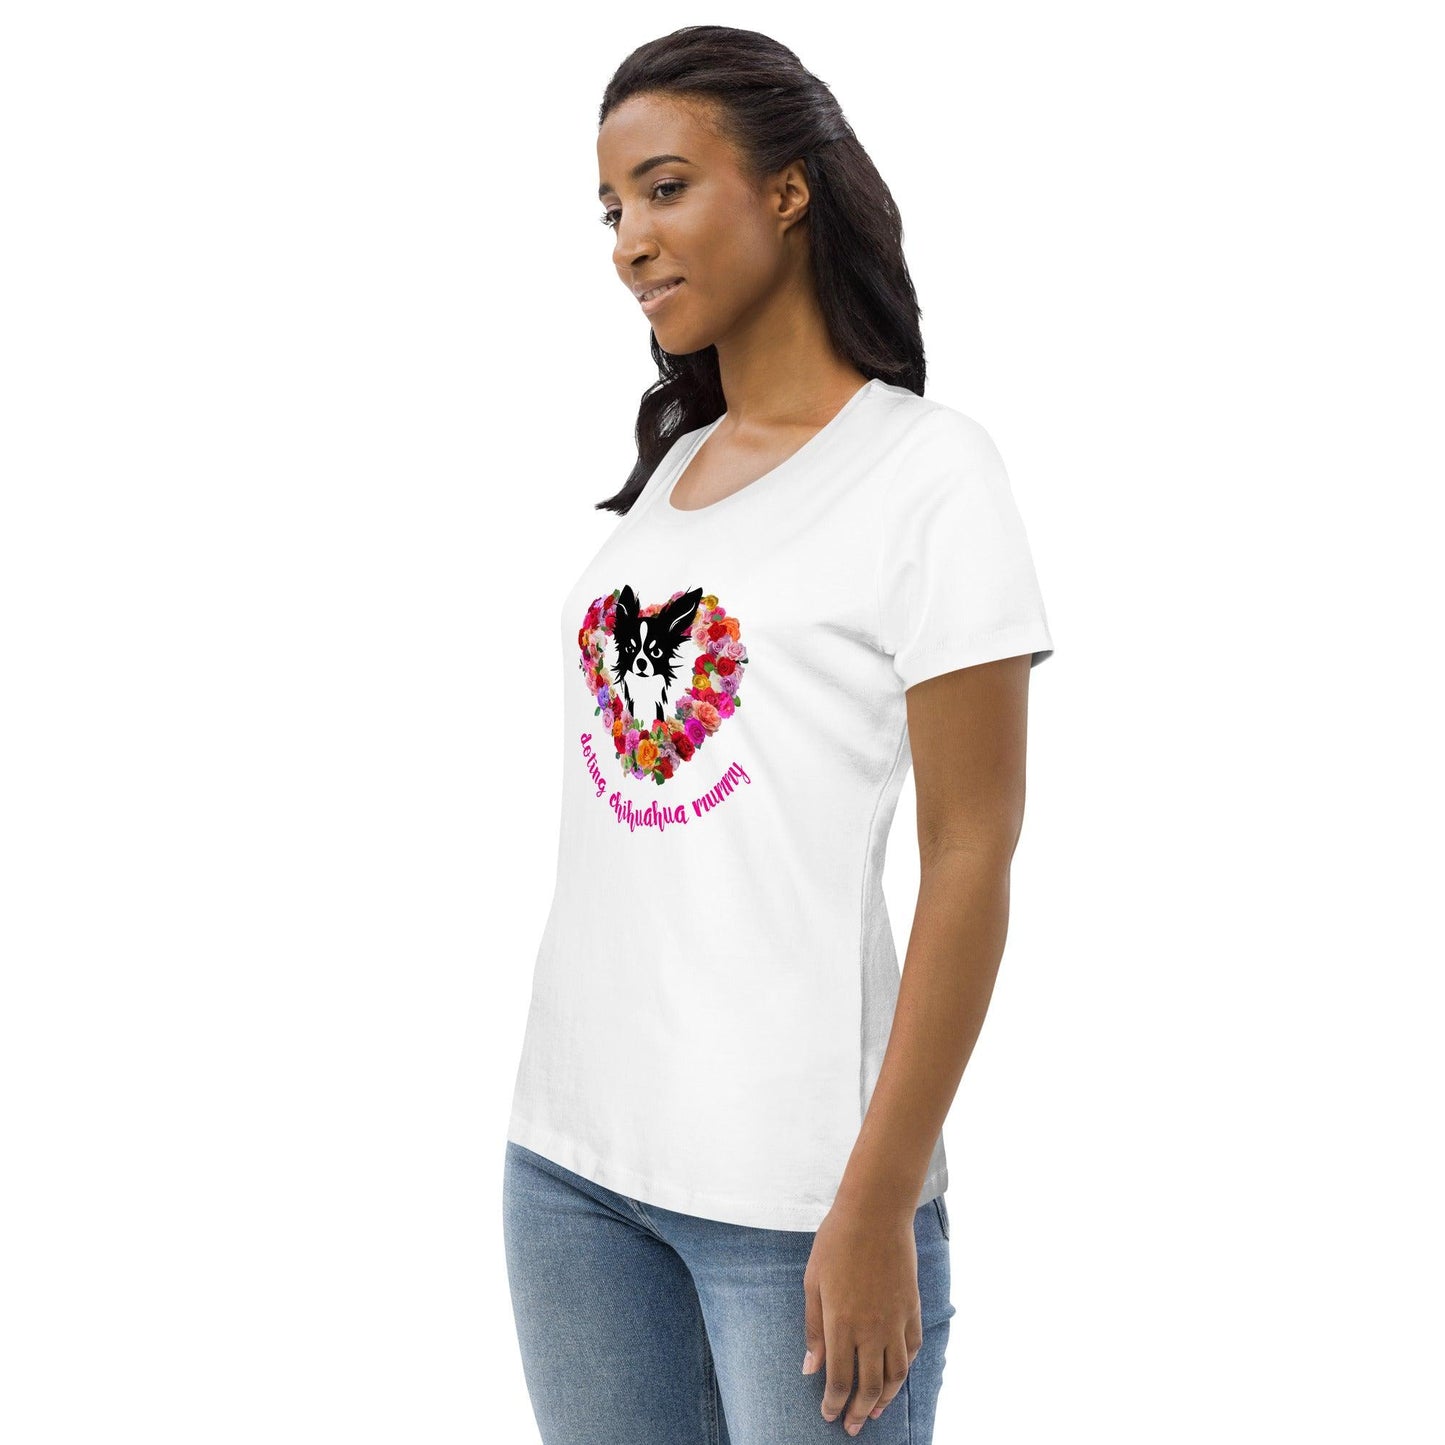 White 100% organic cotton women's fitted t-shirt. Chihuahua and a love heart of roses with the words "doting chihuahua mummy". S-2XL. Romantic, cute and perfect for Mother's Day. Design by Renate Kriegler for Chimigos.